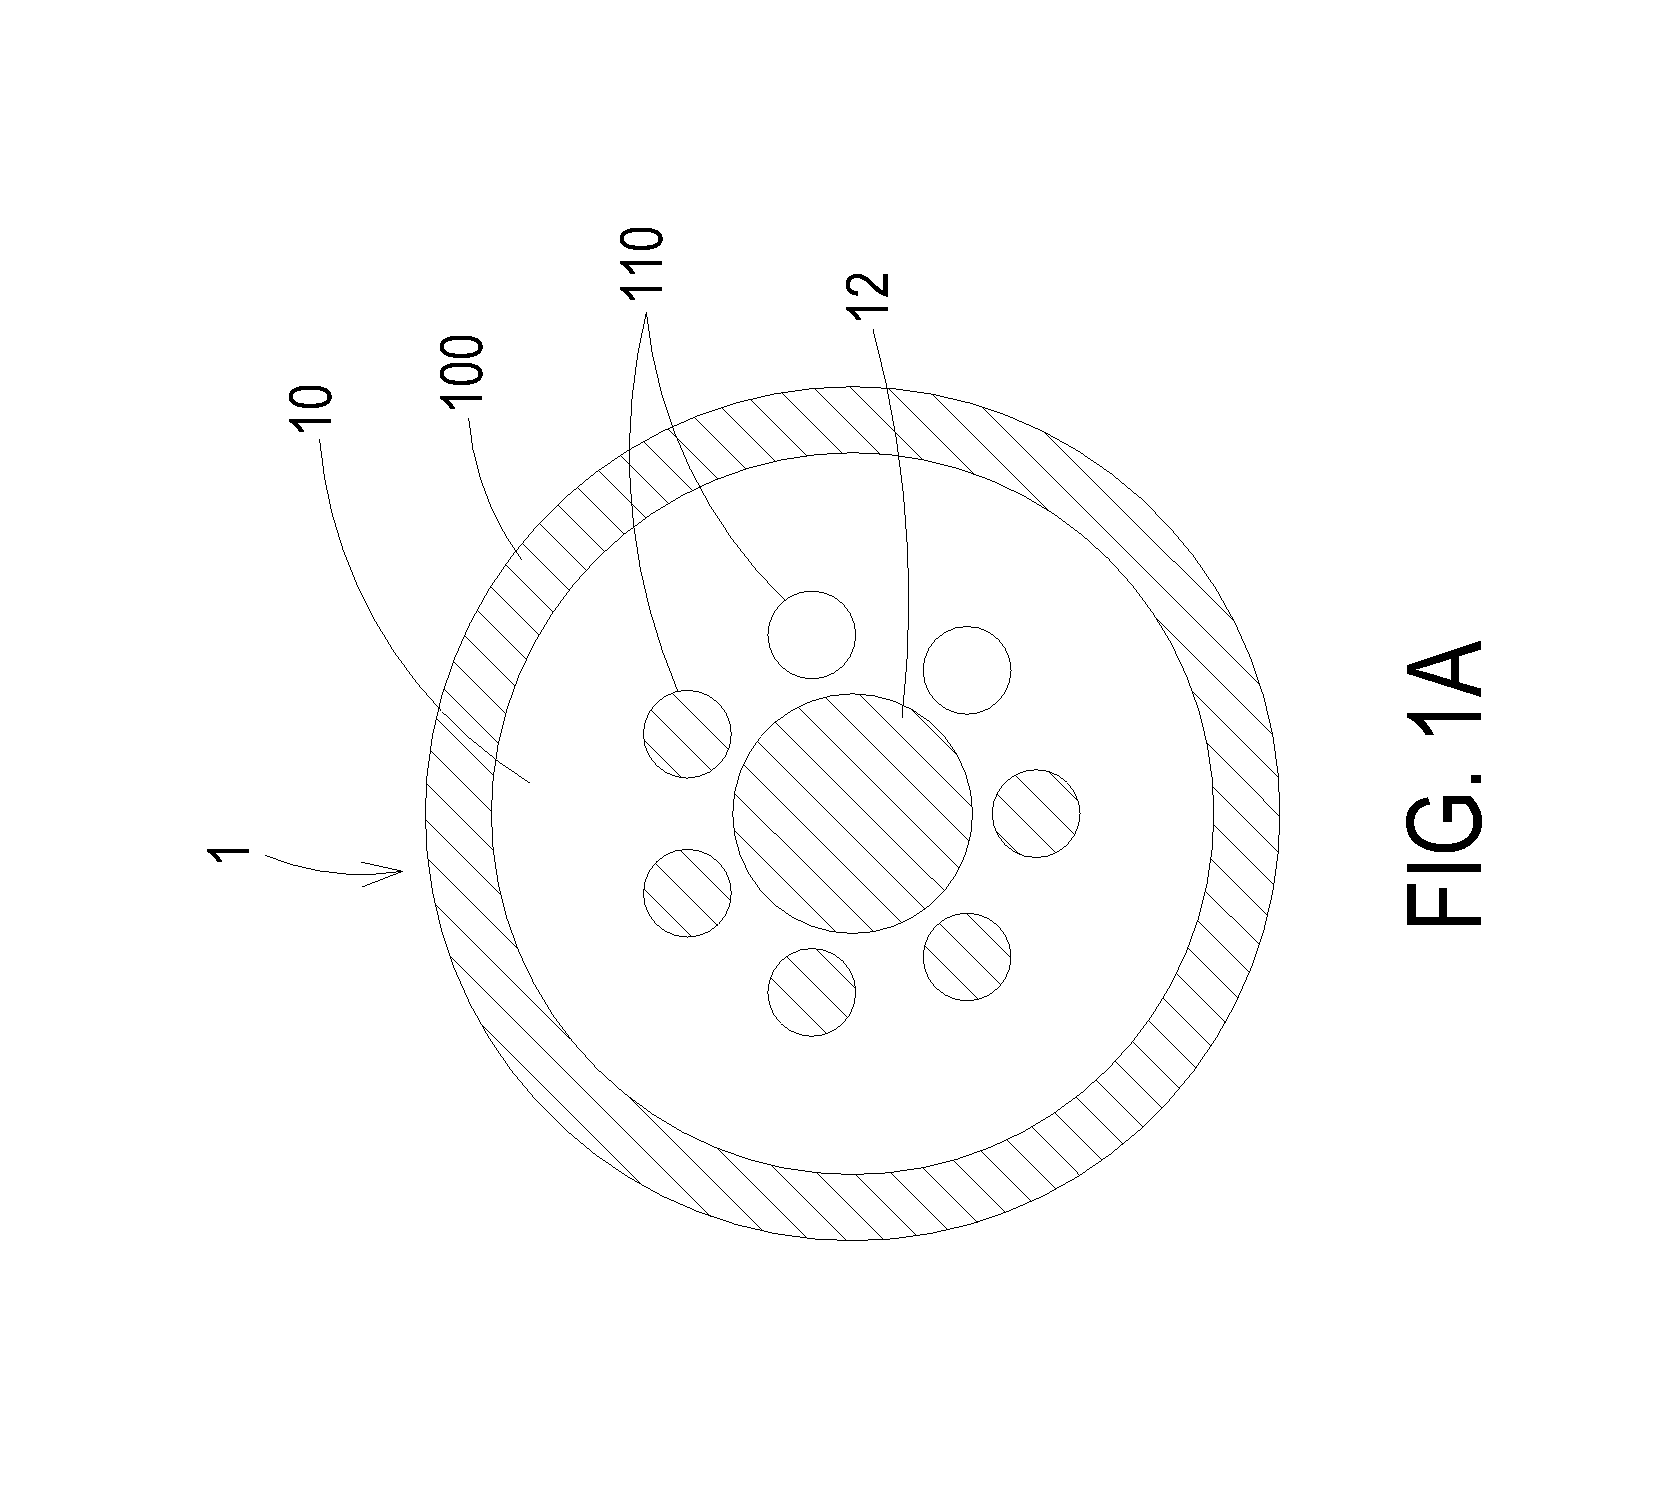 Phosphor wheel heat-dissipating module for laser projection system